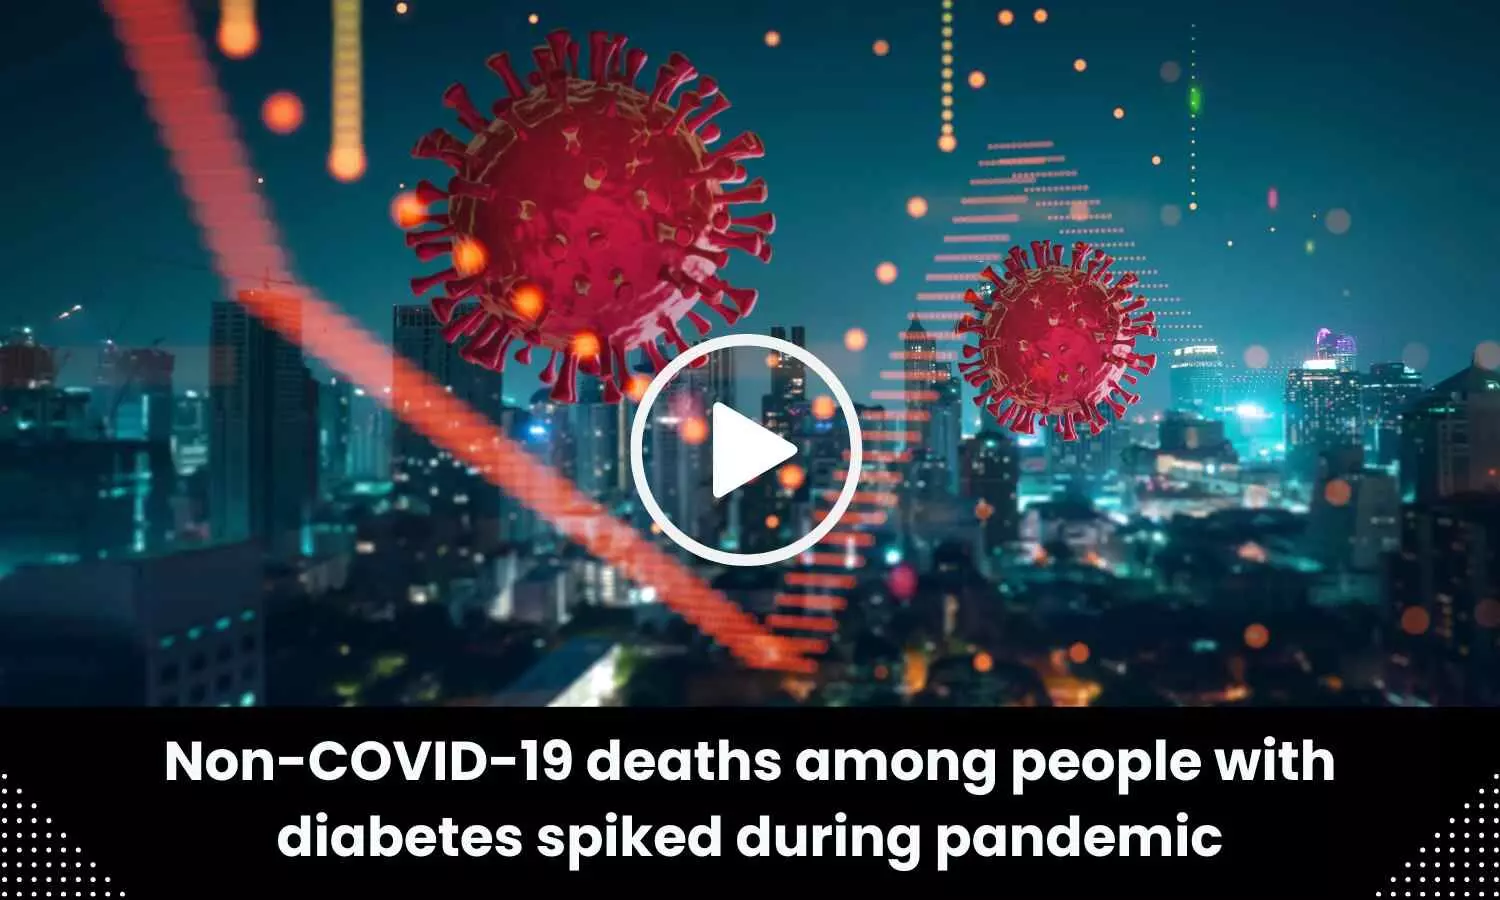 Non-COVID-19 deaths among people with diabetes spiked during pandemic